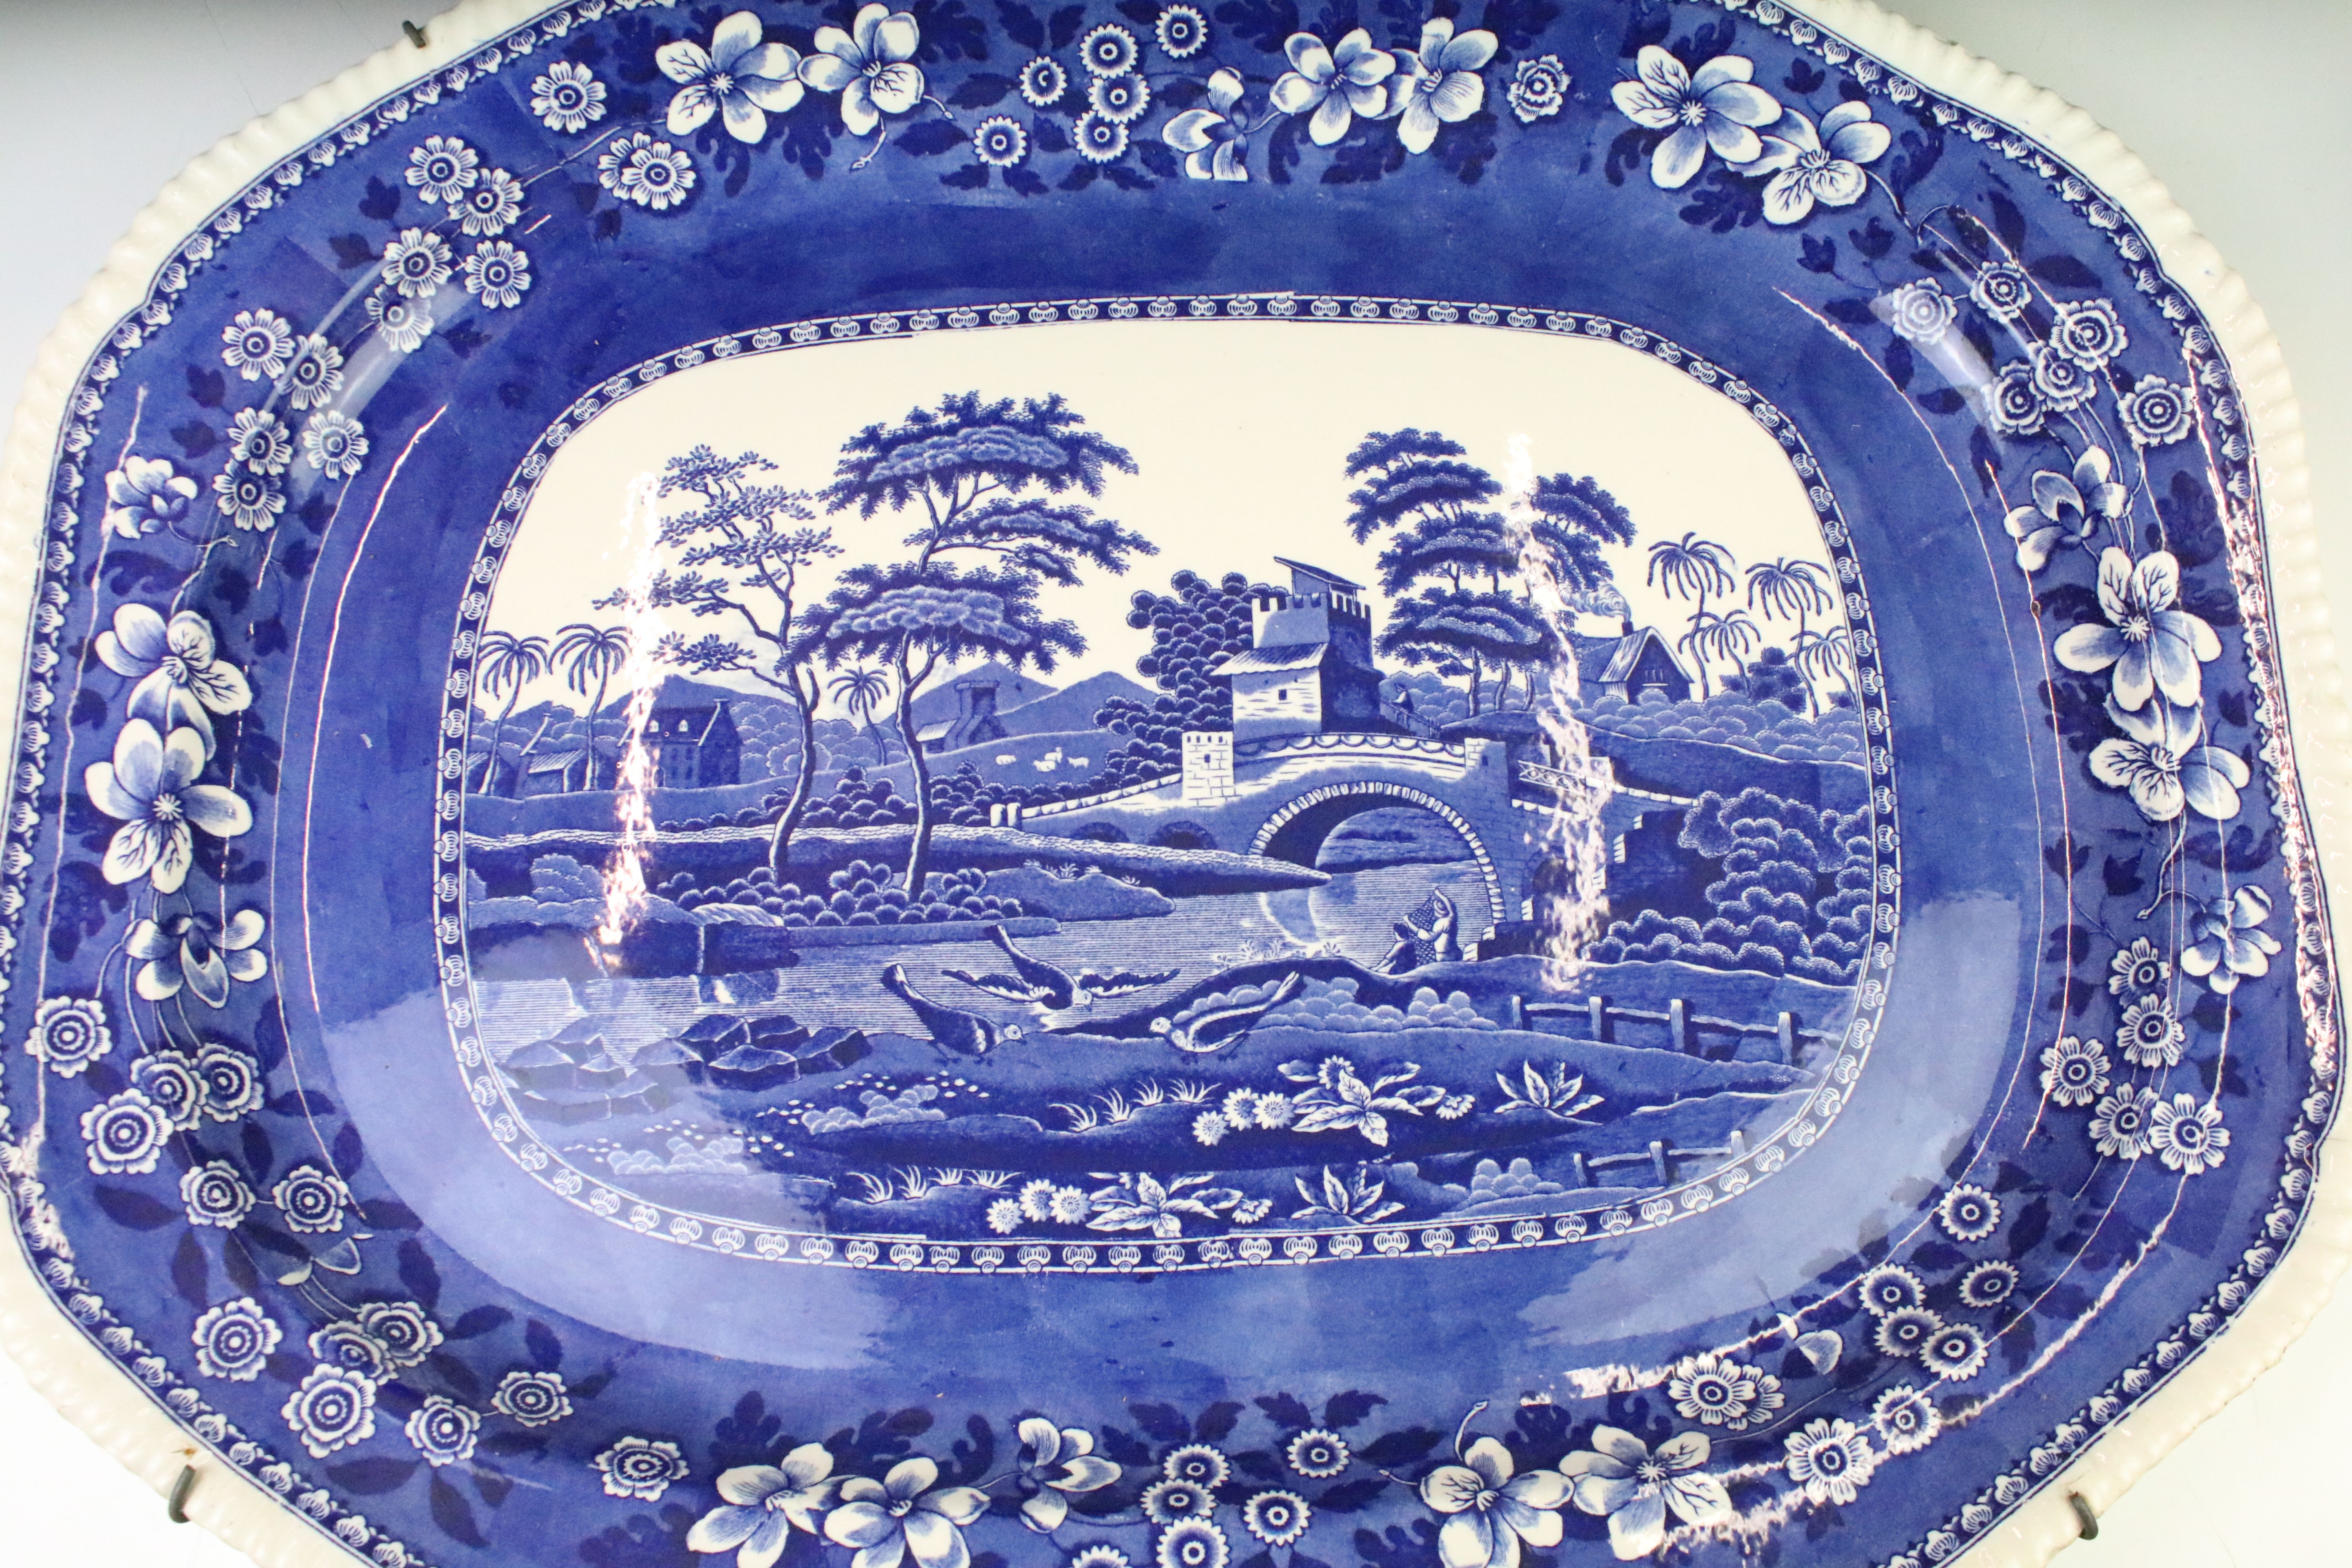 19th Century Copeland Spode's Tower larger blue and white transfer printed platter featuring a river - Image 2 of 5